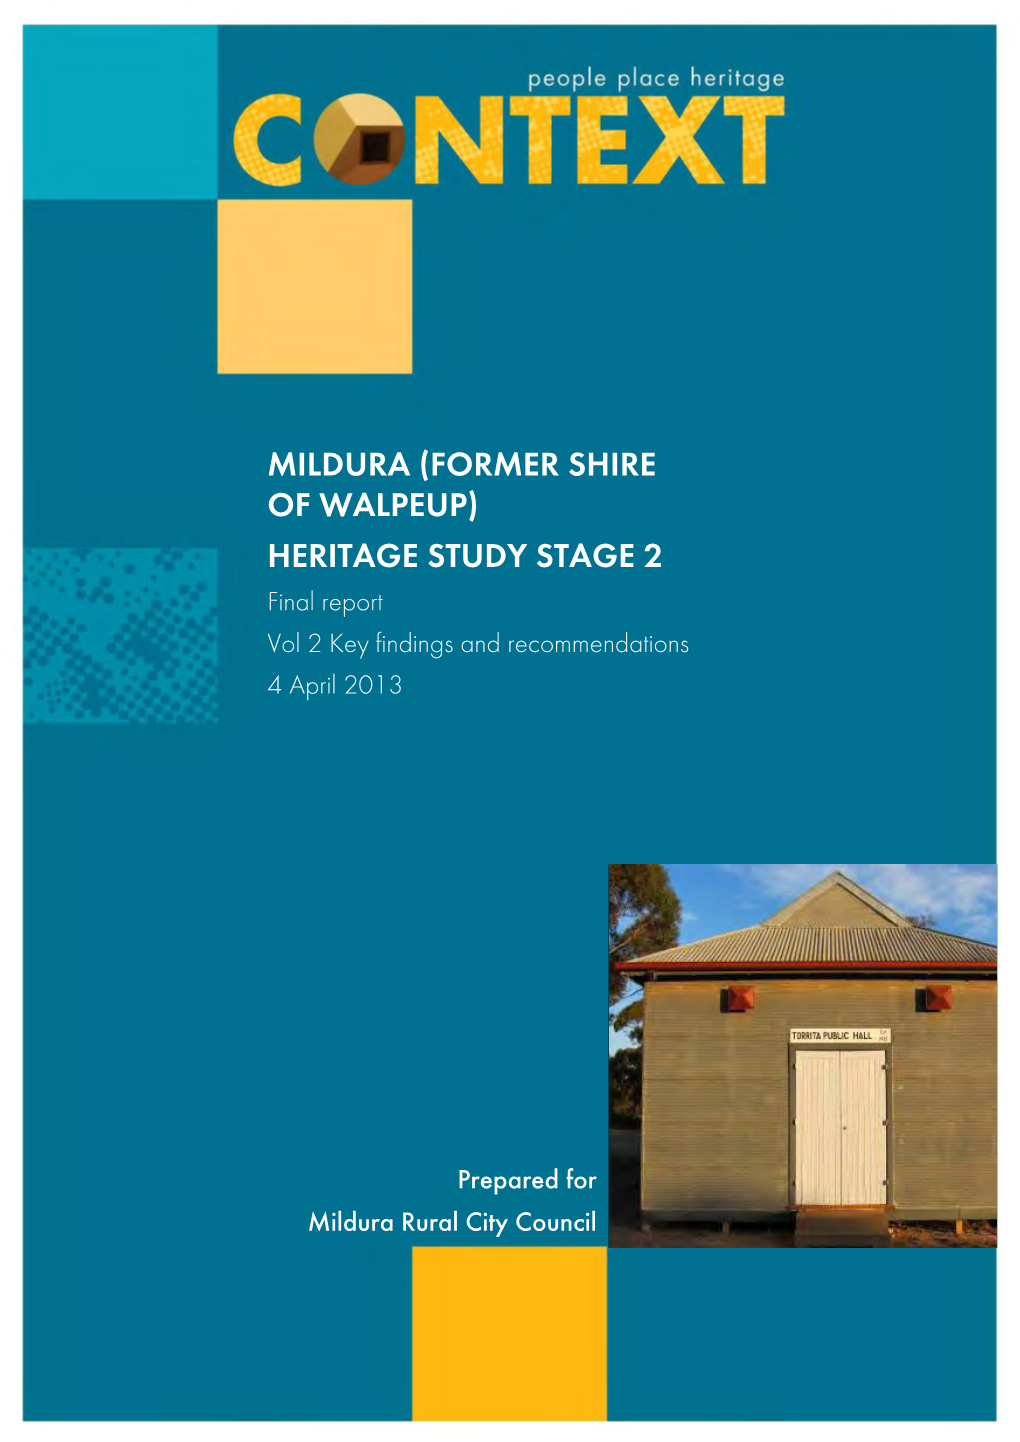 (FORMER SHIRE of WALPEUP) HERITAGE STUDY STAGE 2 Final Report Vol 2 Key Findings and Recommendations 4 April 2013